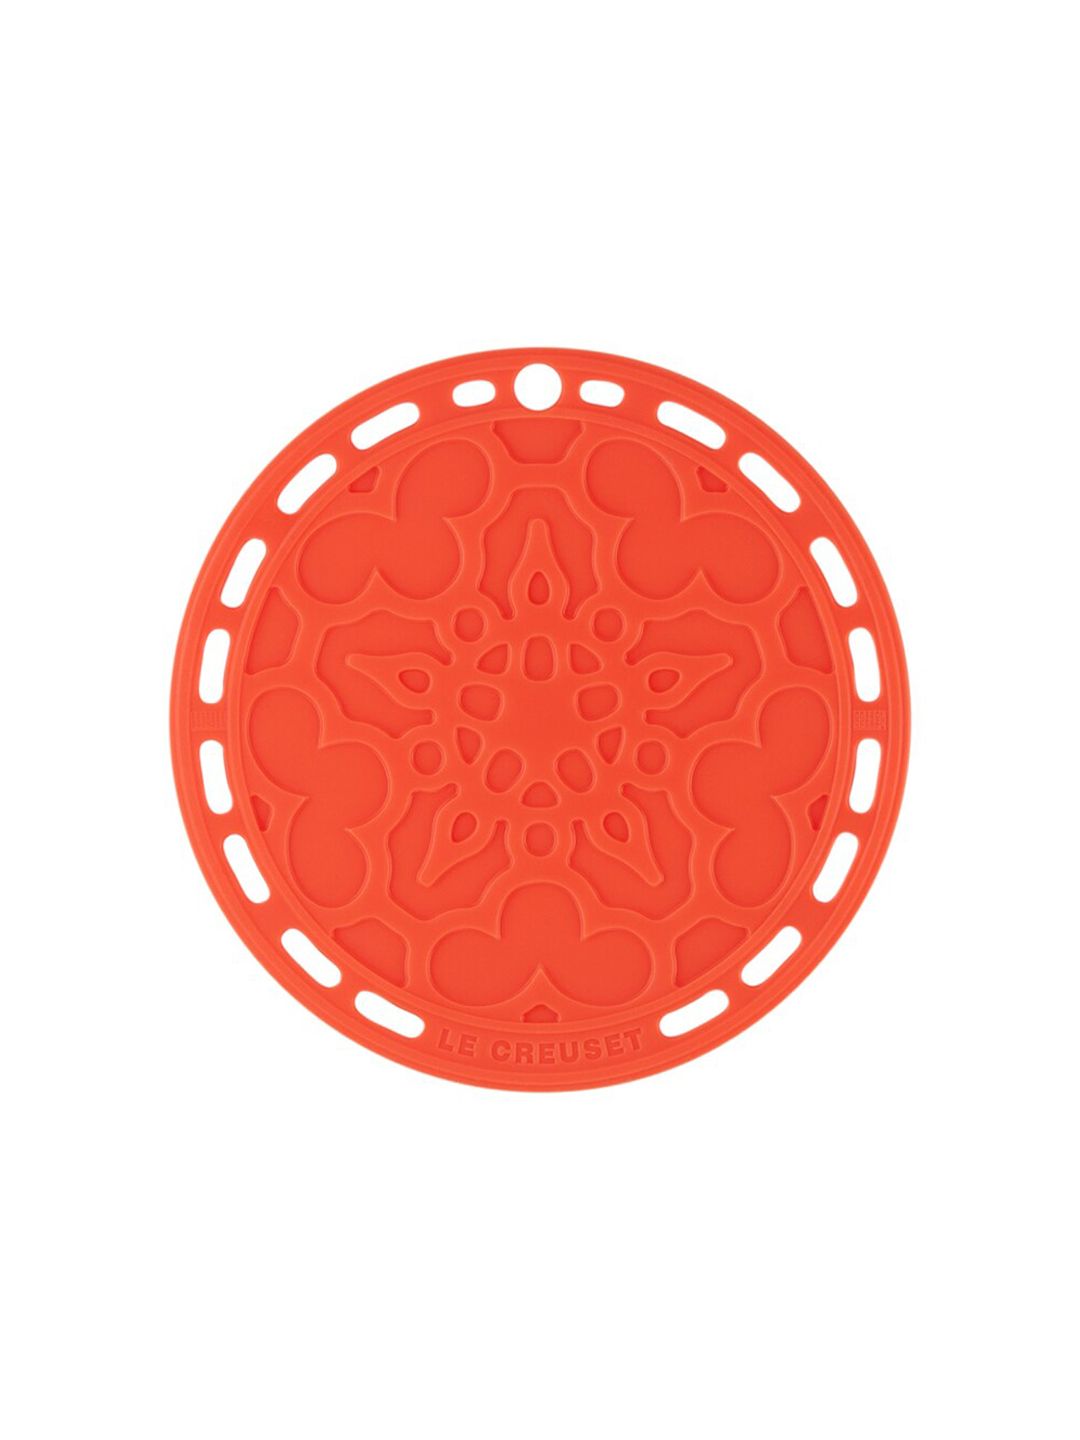 LE CREUSET Orange Textured Silicone French Trivet-Flame Price in India